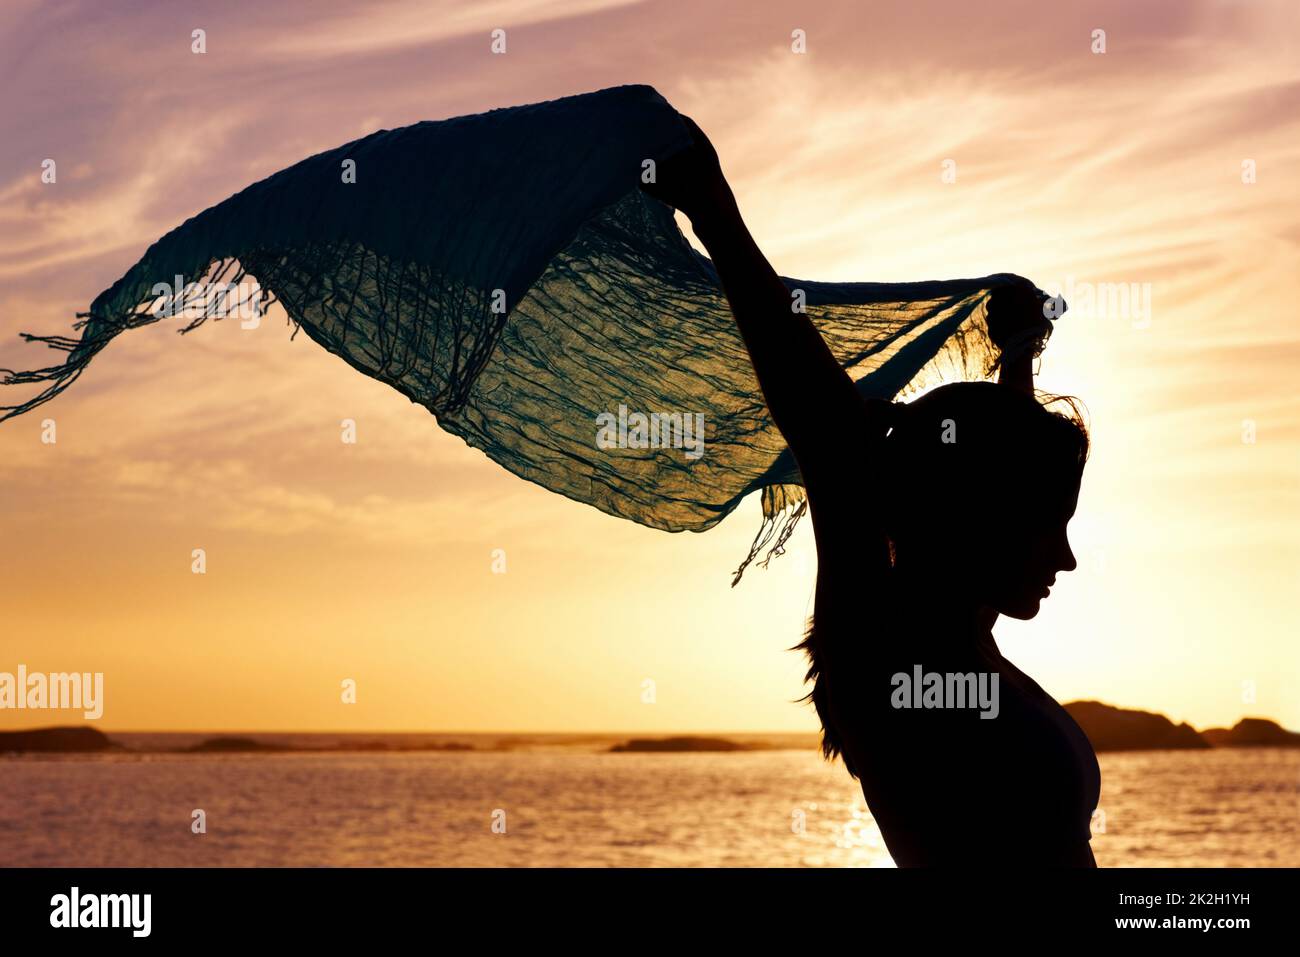 Silhouette image of a woman holding up shawl at sunset. Silhouette image of a beautiful woman holding up shawl at sunset. Stock Photo